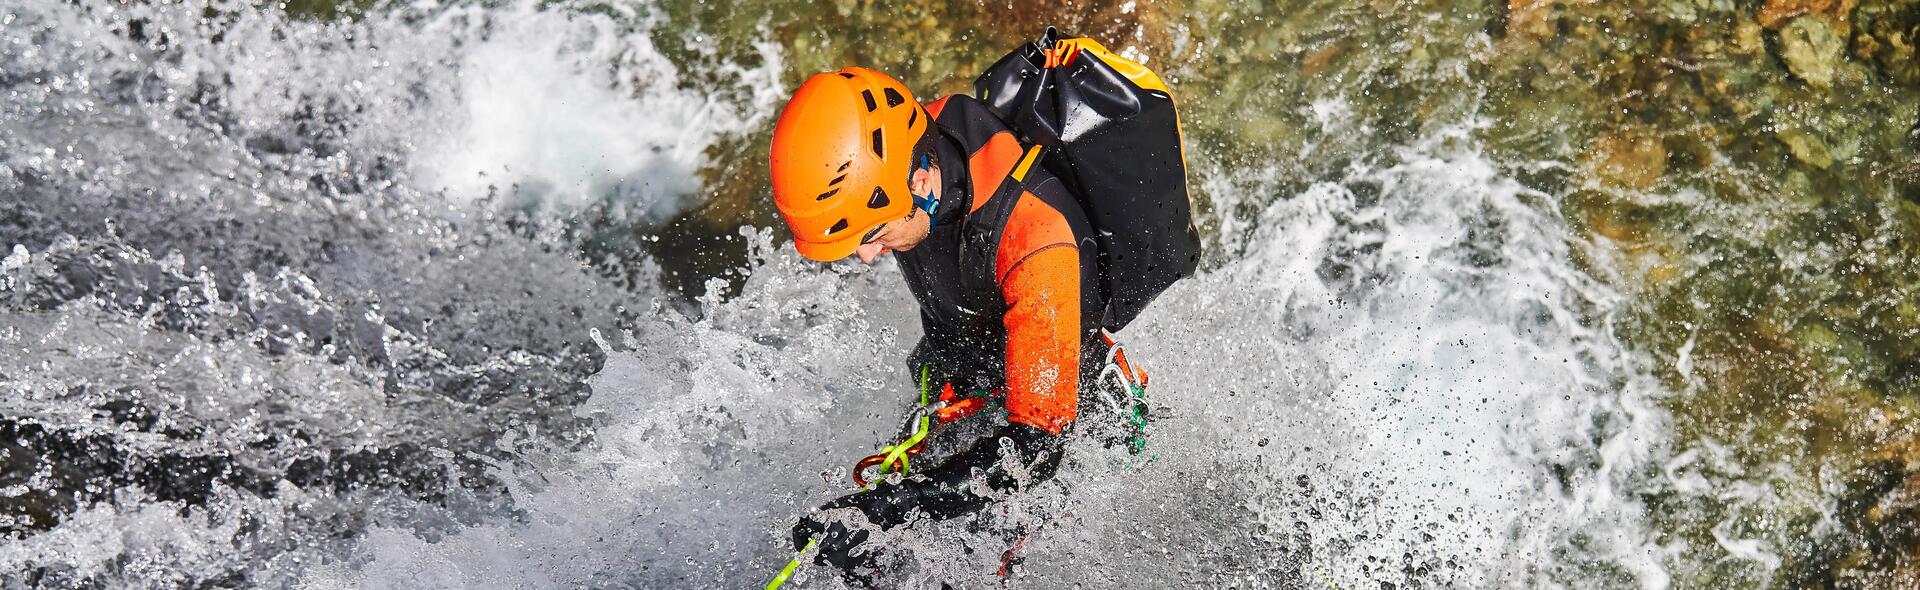 benefici del canyoning